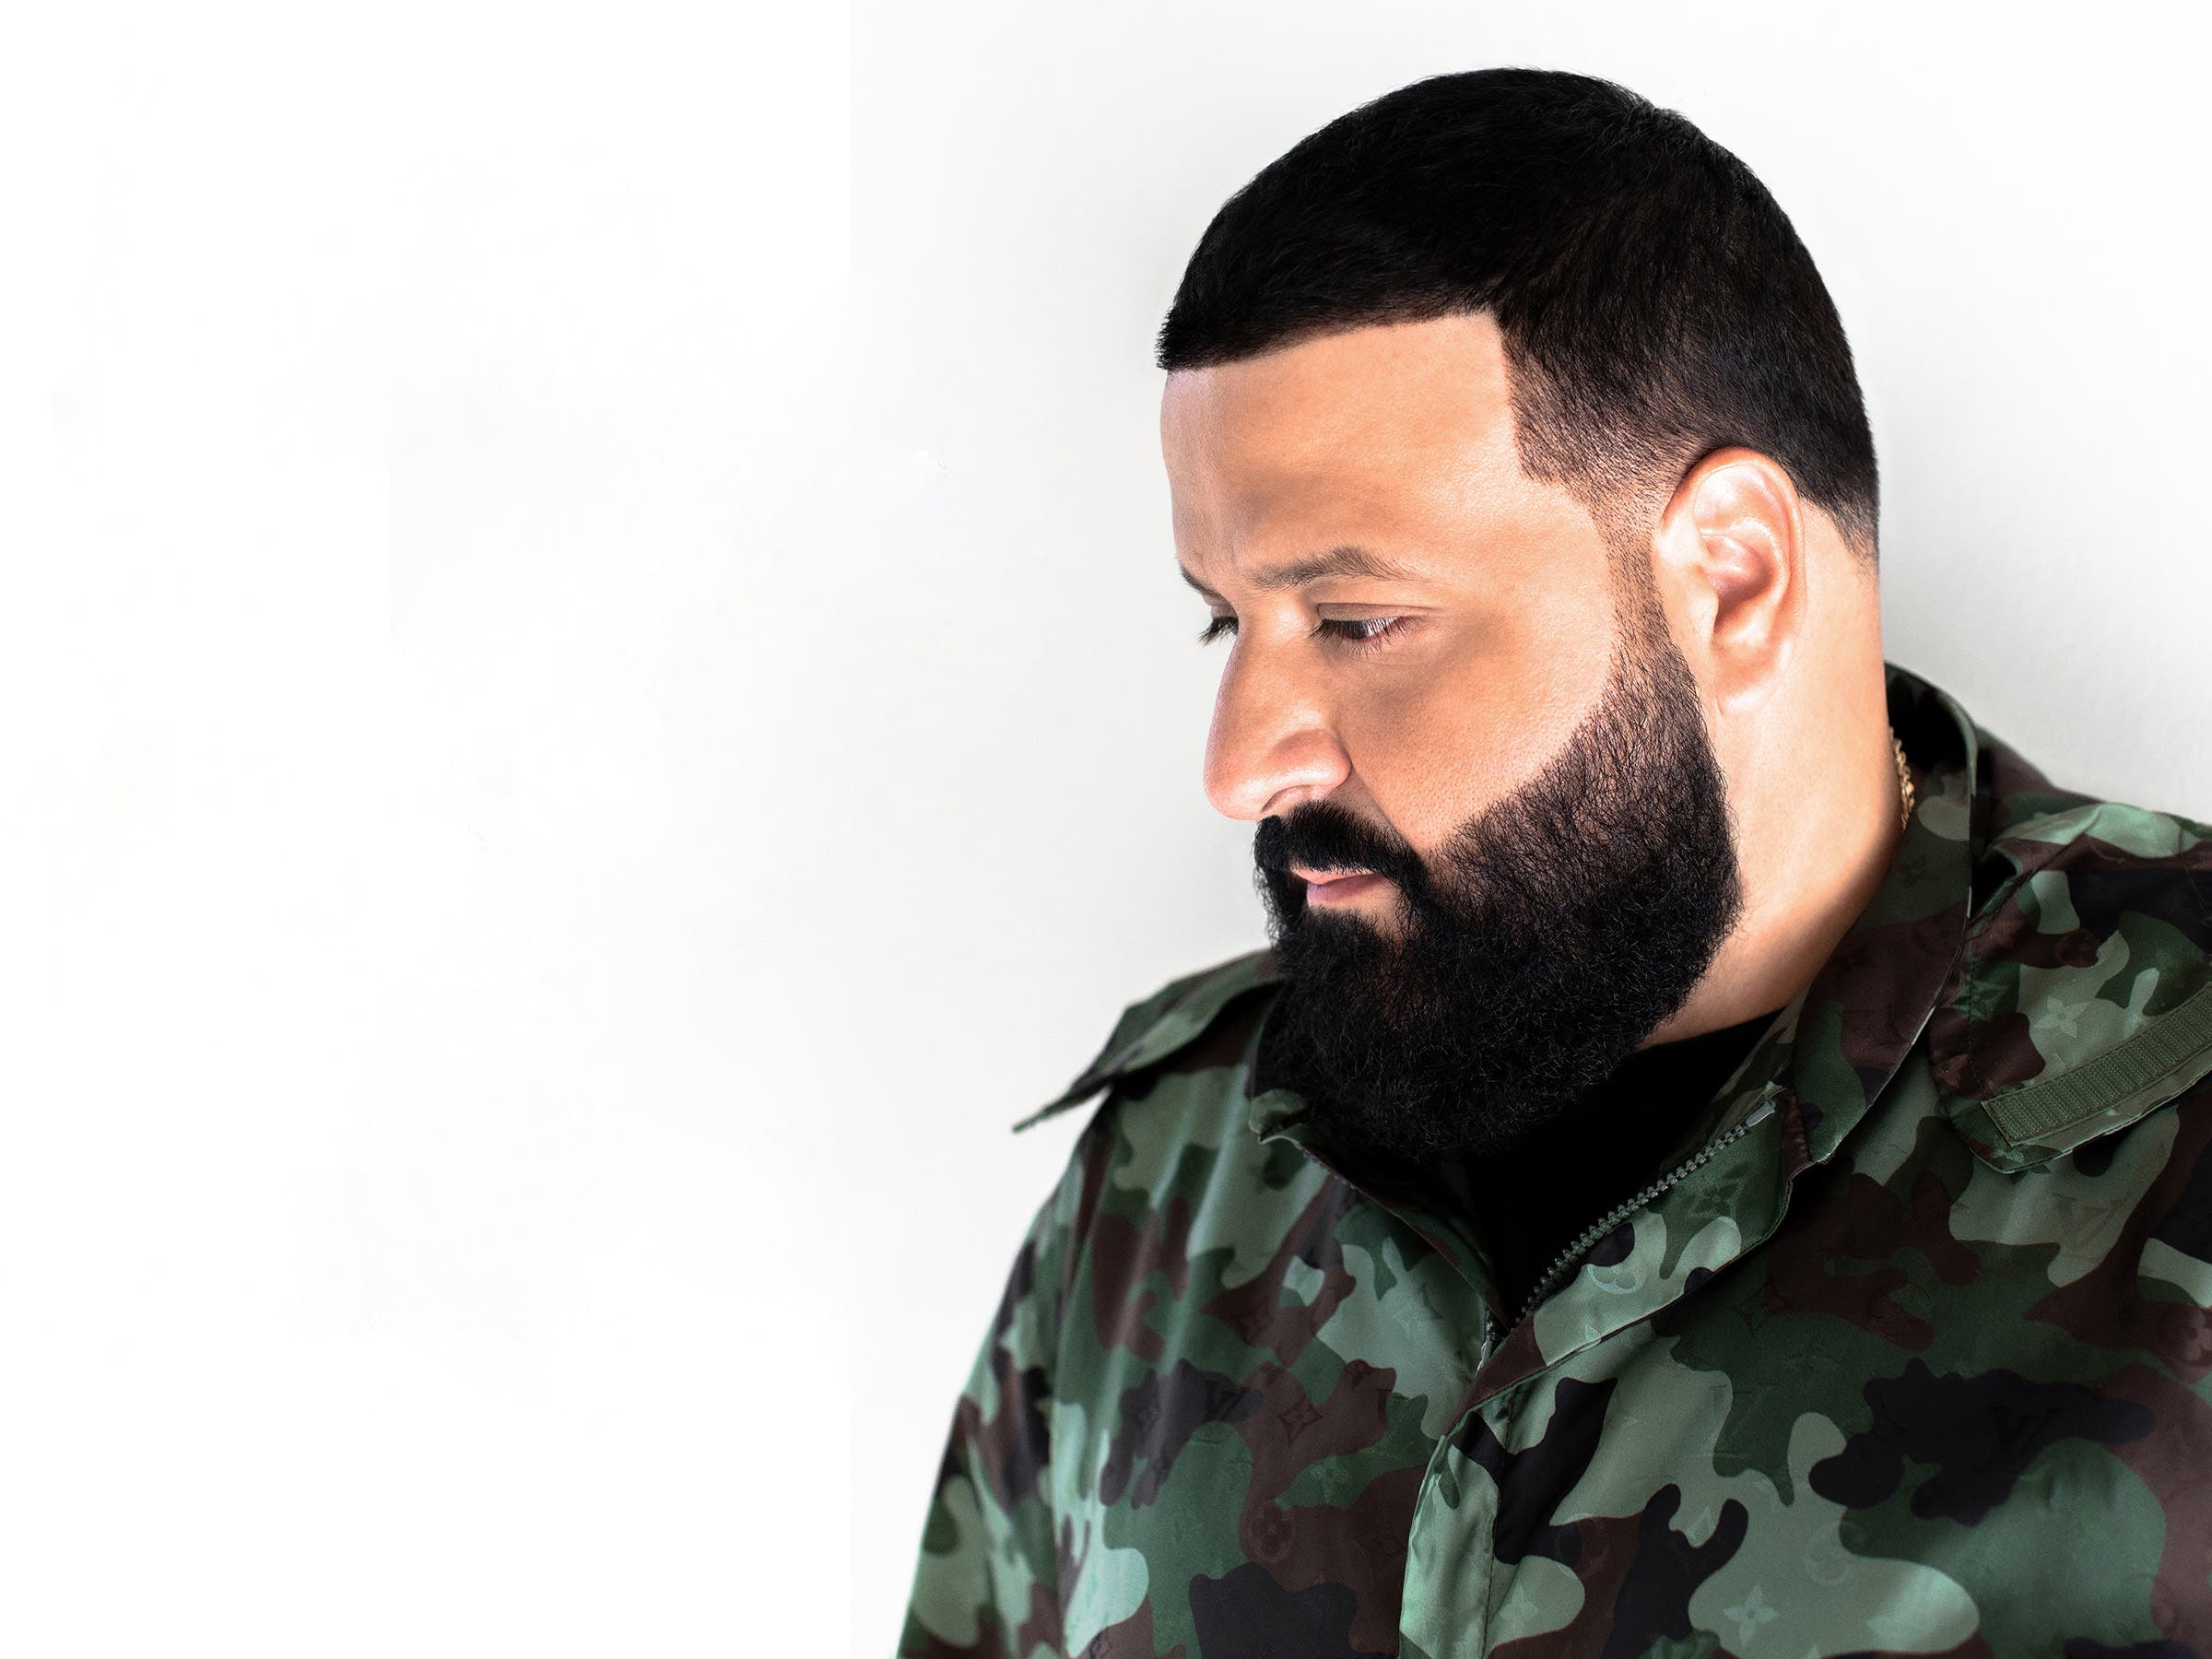 Drake takes out third week at Number 1 DJ Khaled scores Top 5 new entry